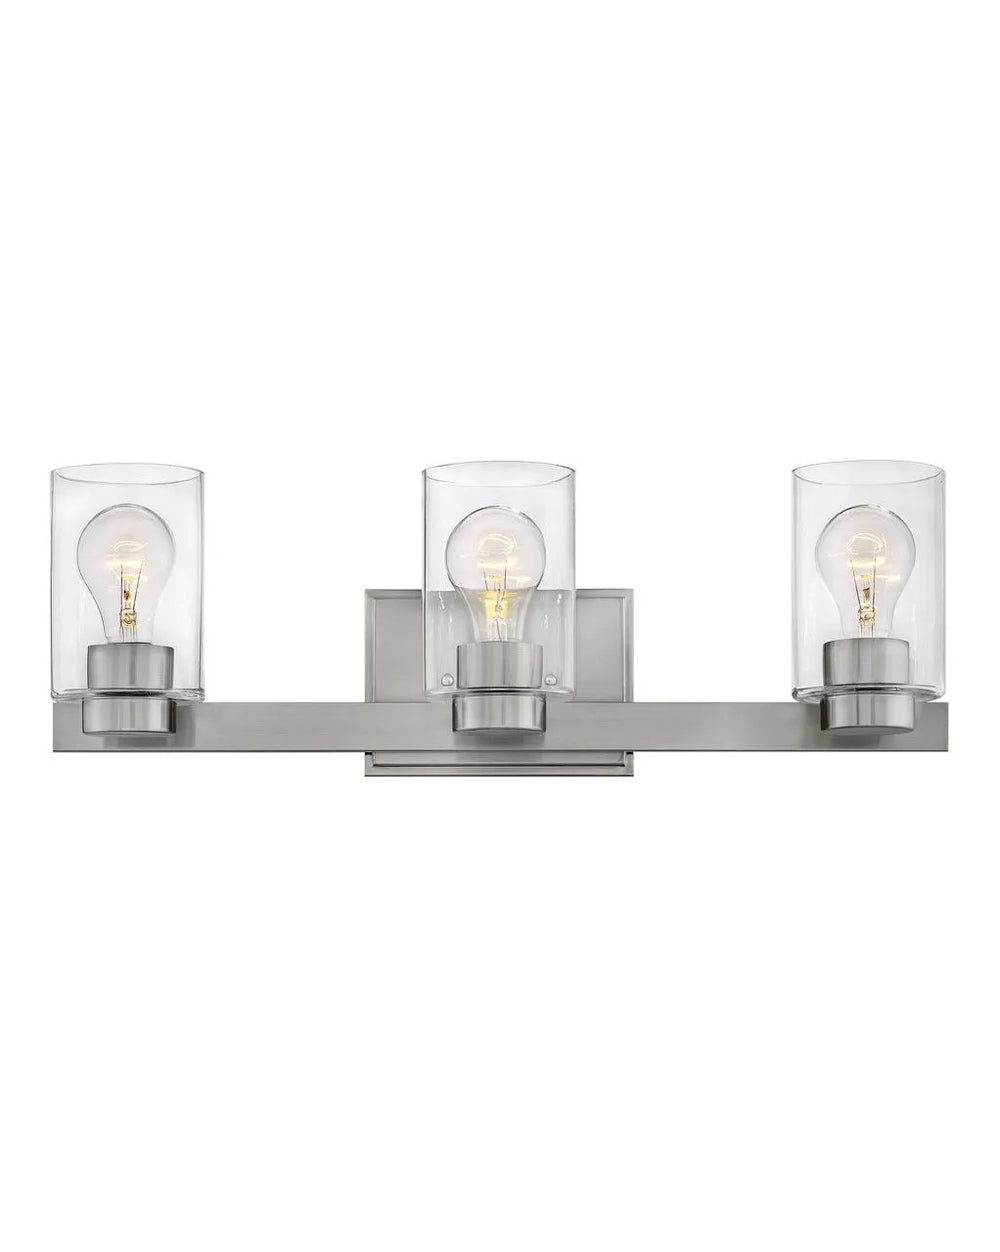 Bath Miley - Three light Vanity-Hinkley Lighting-HINKLEY-5053BN-CL-Bathroom LightingBrushed Nickel with Clear glass-Normal-2-France and Son